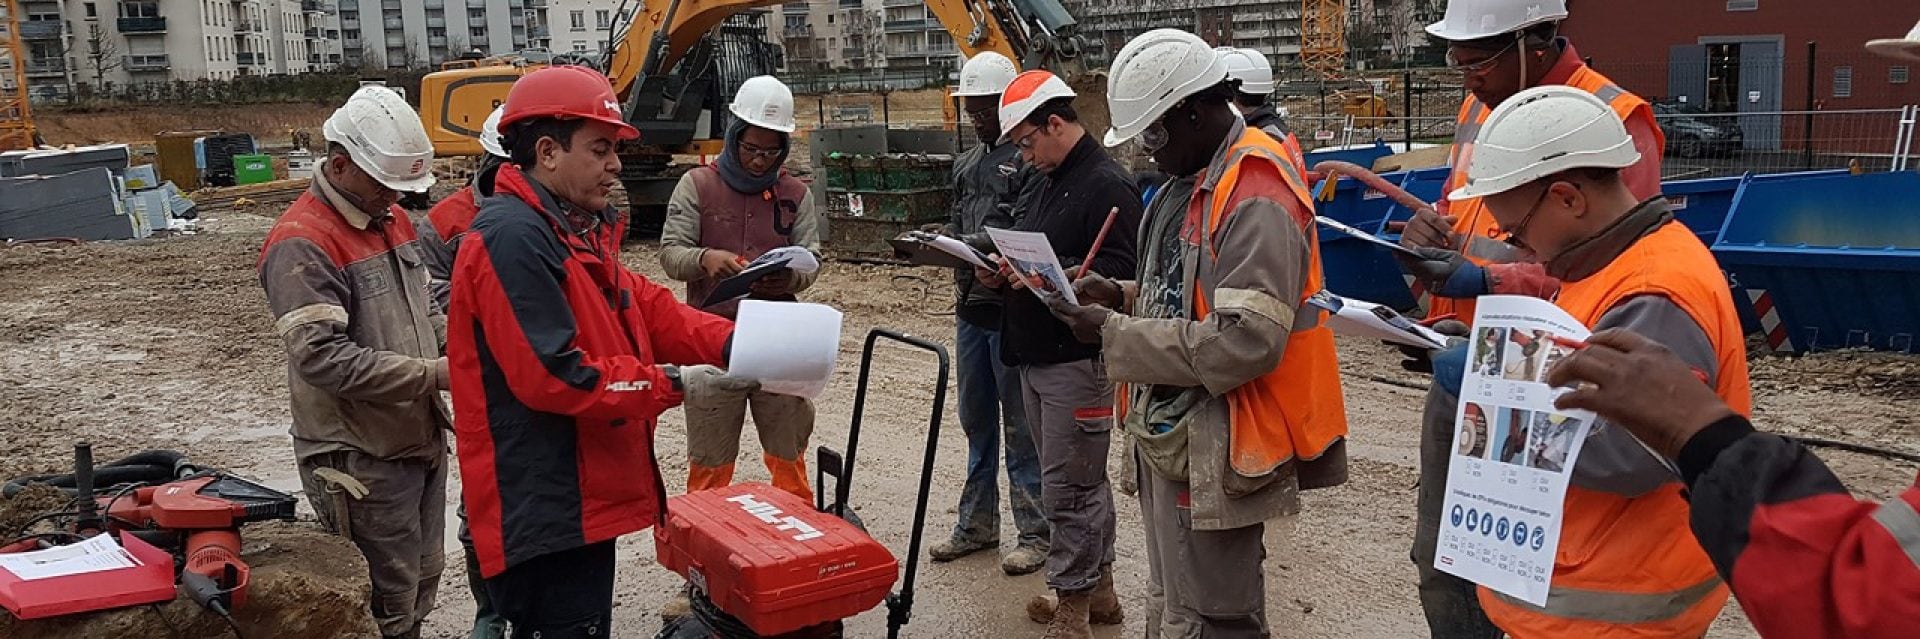 Hilti partnership for safety and productivity